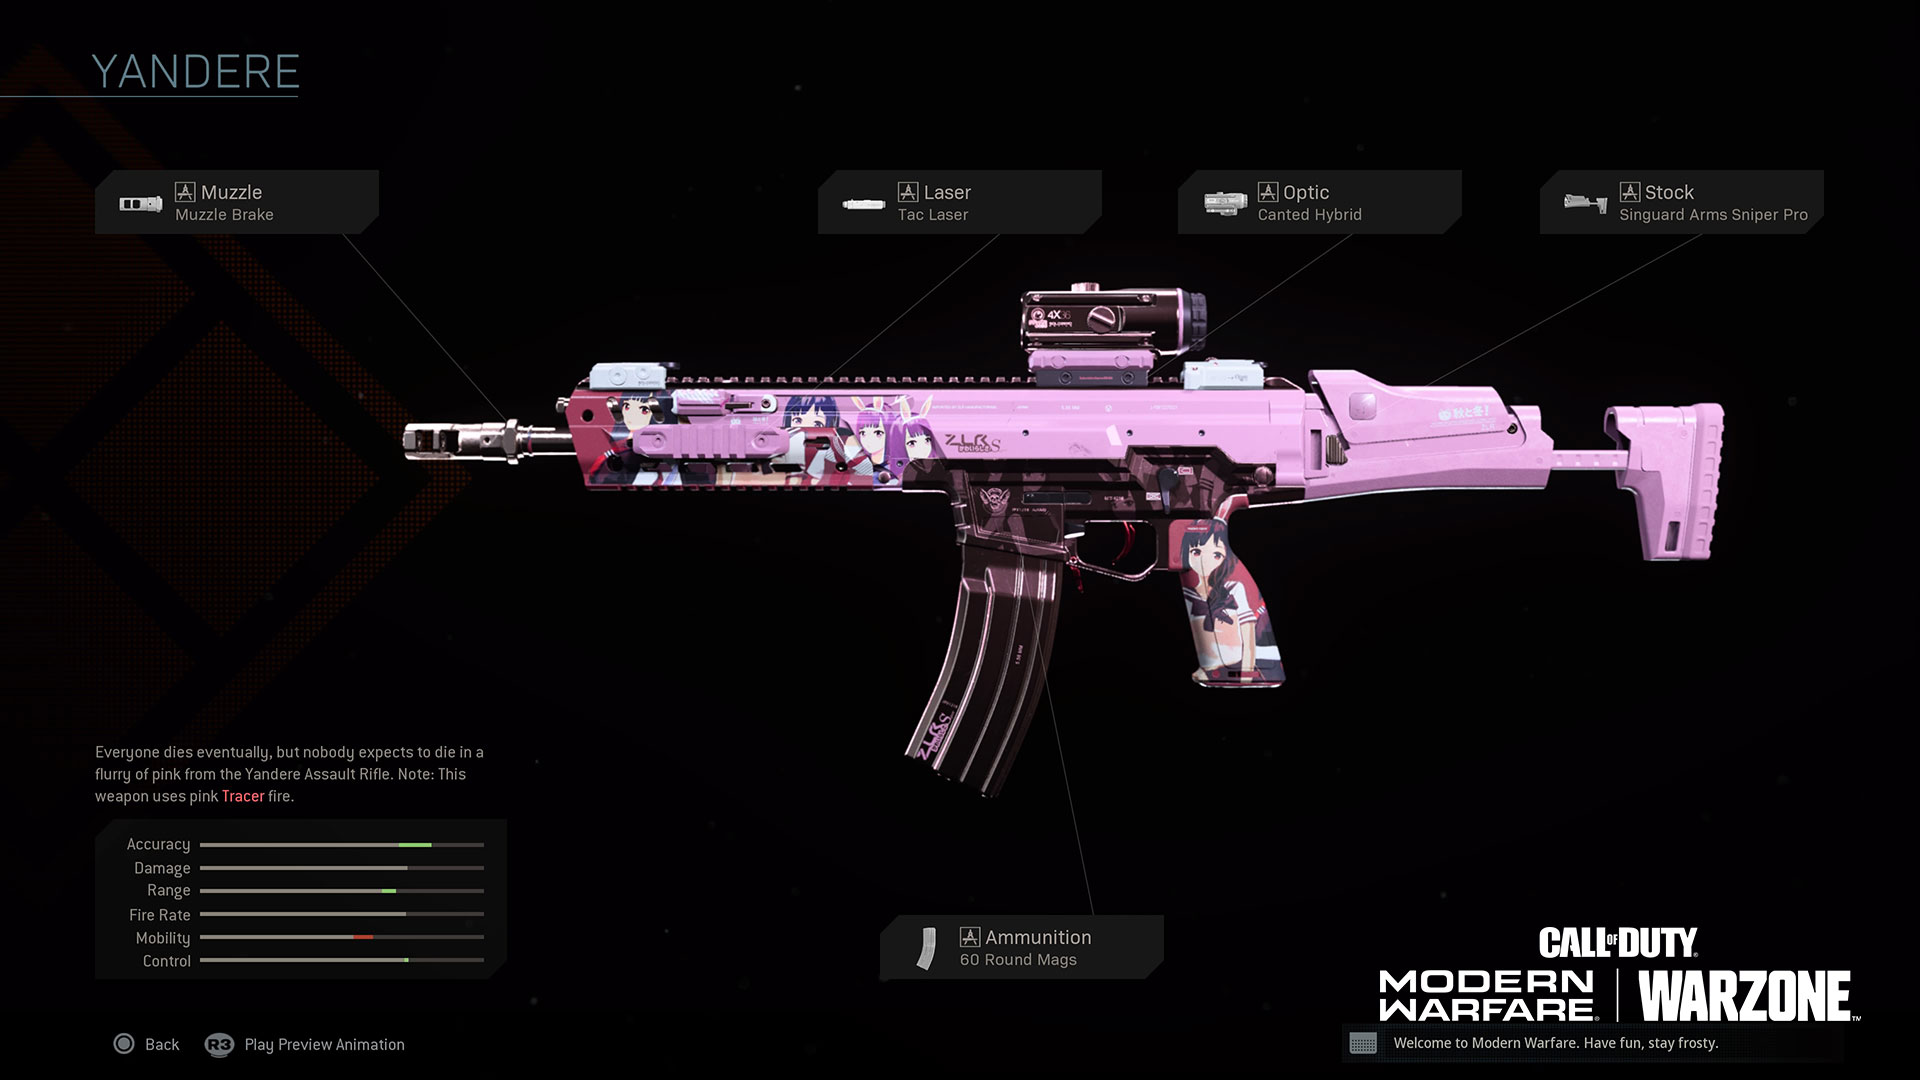 Call Of Duty Warzone Gets Anime Gun Skins In This Week S Update Pcgamesn It is called the 'tracer pack anime super' bundle, which costs 1,900 cod points, and includes a selection of skins for the legendary assault rifle think of this pack then as 'hard mode'. call of duty warzone gets anime gun